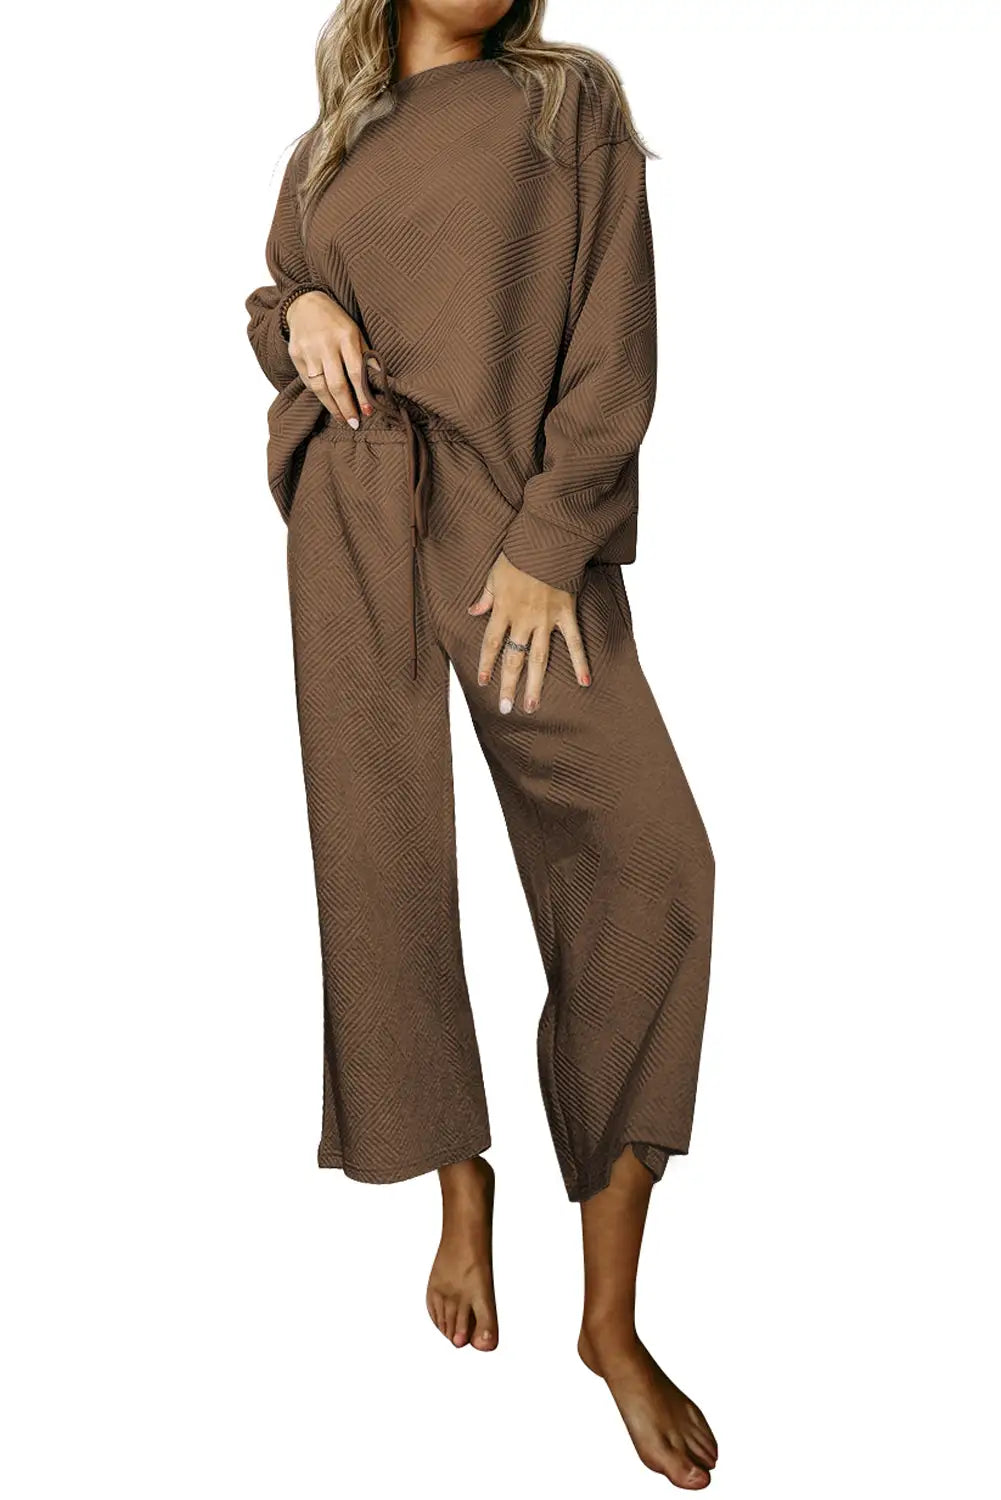 Dark brown ultra loose textured 2pcs slouchy outfit - loungewear